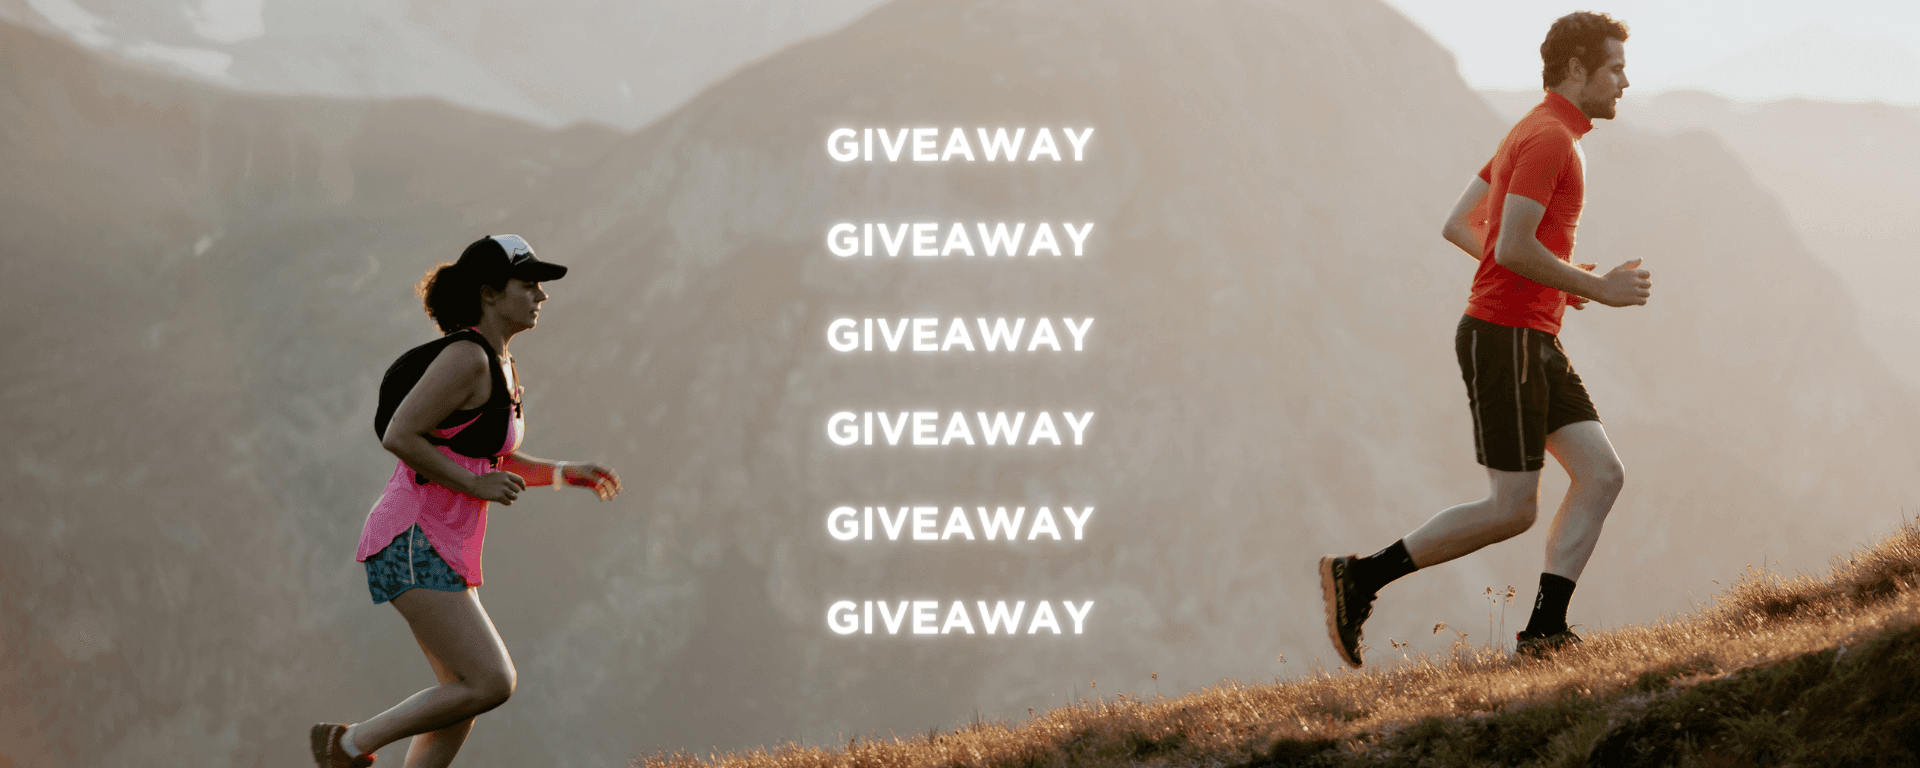 Giveaway closed - Win 1 bib for the Sierre - Zinal race!